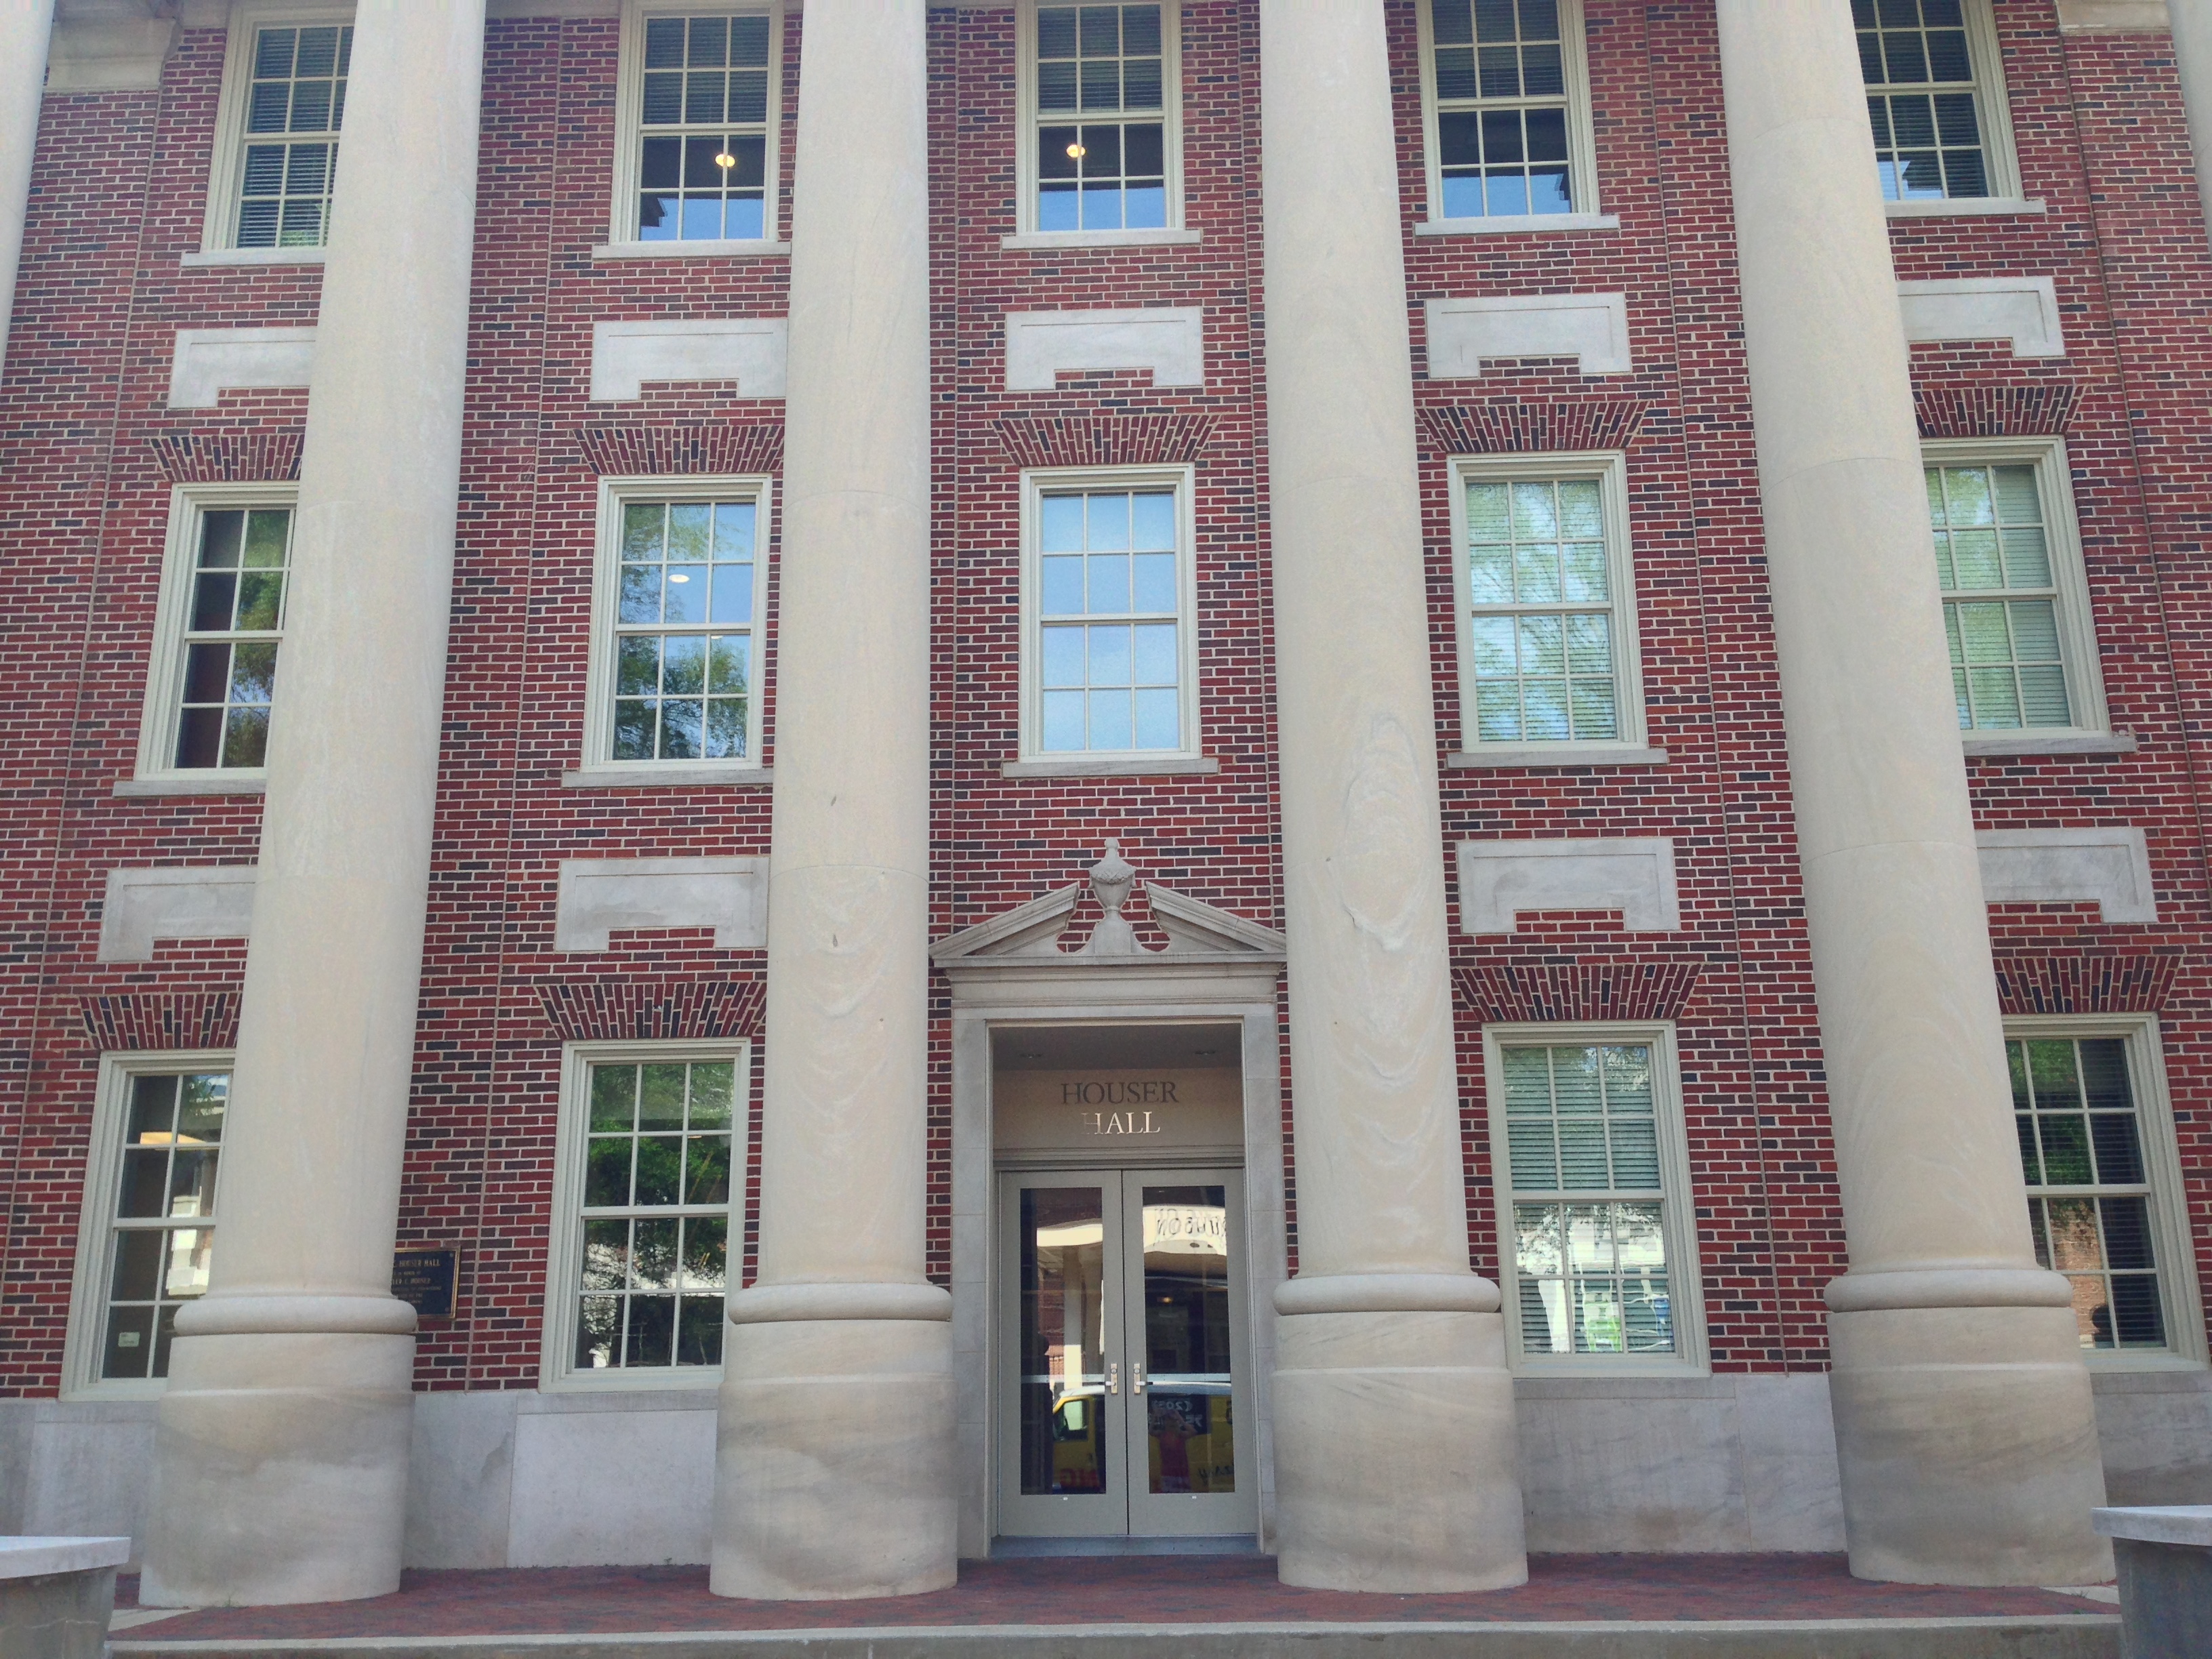 Front view of Houser Hall